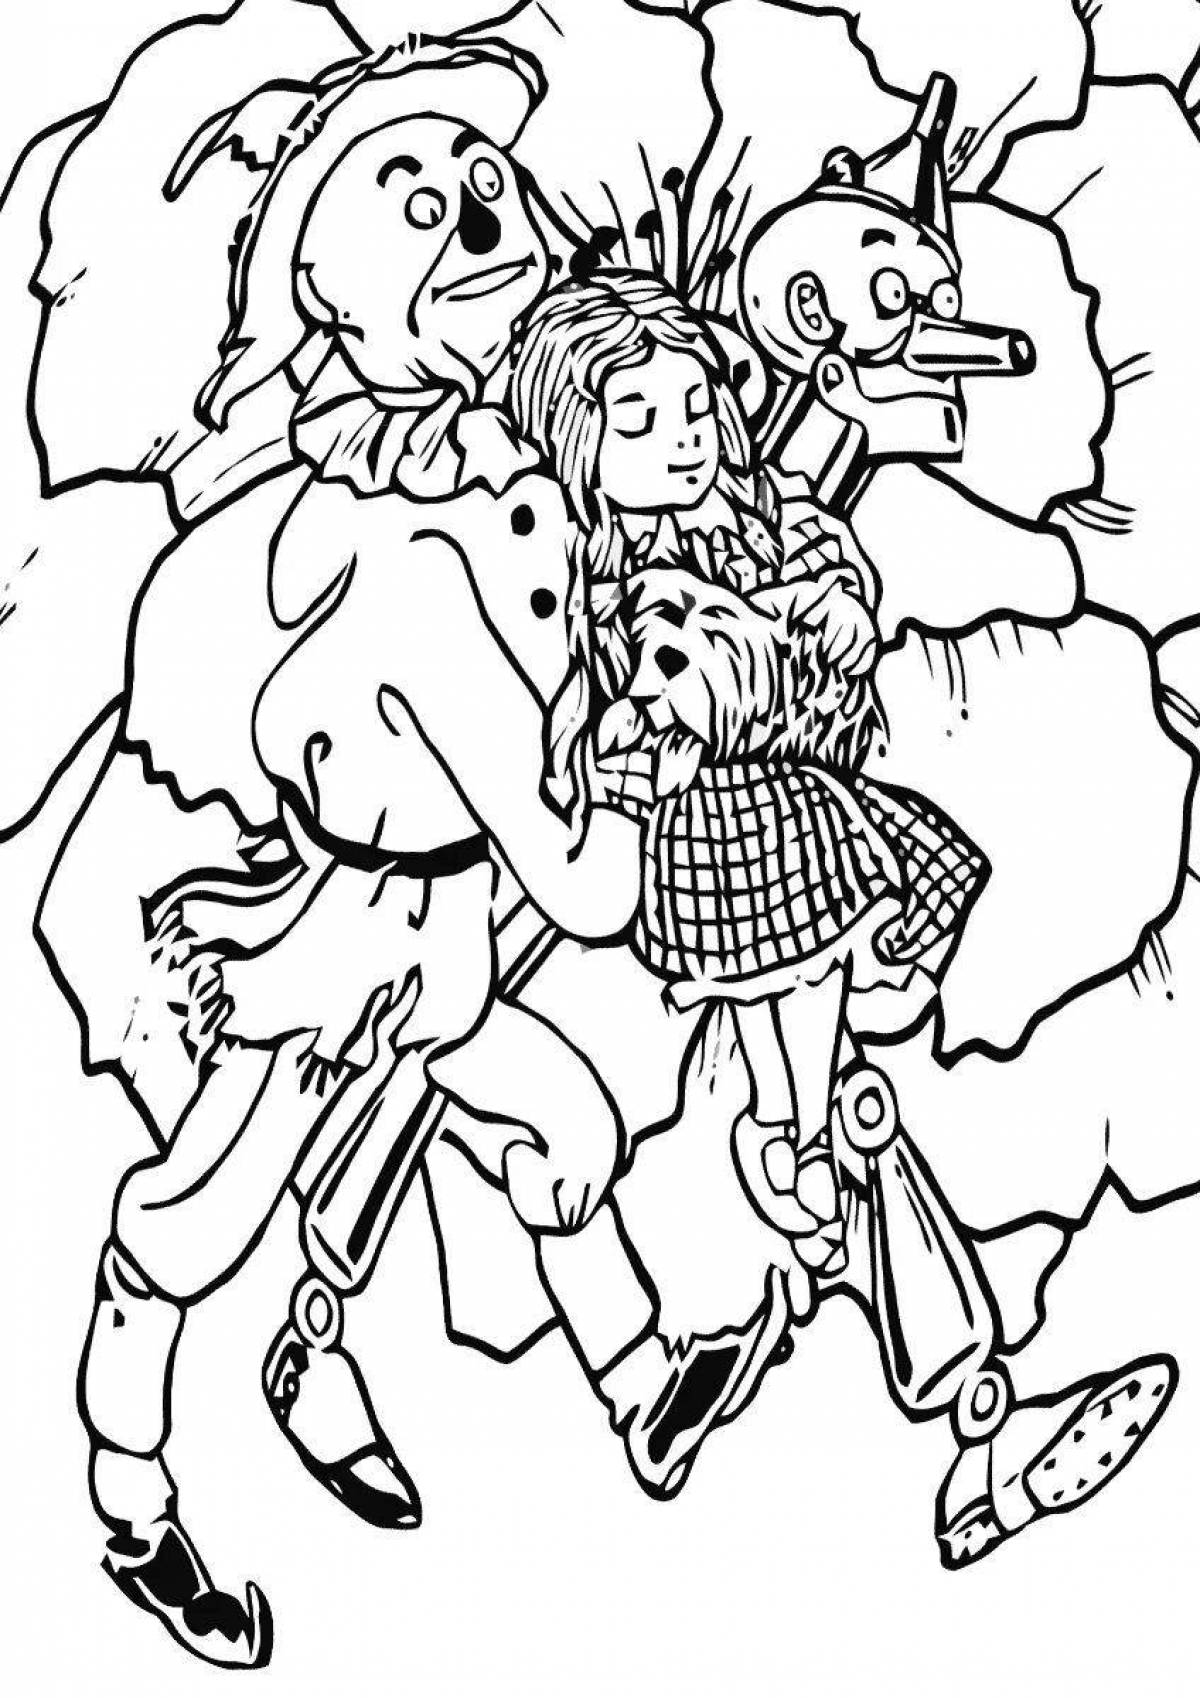 Animated wizard of oz coloring page